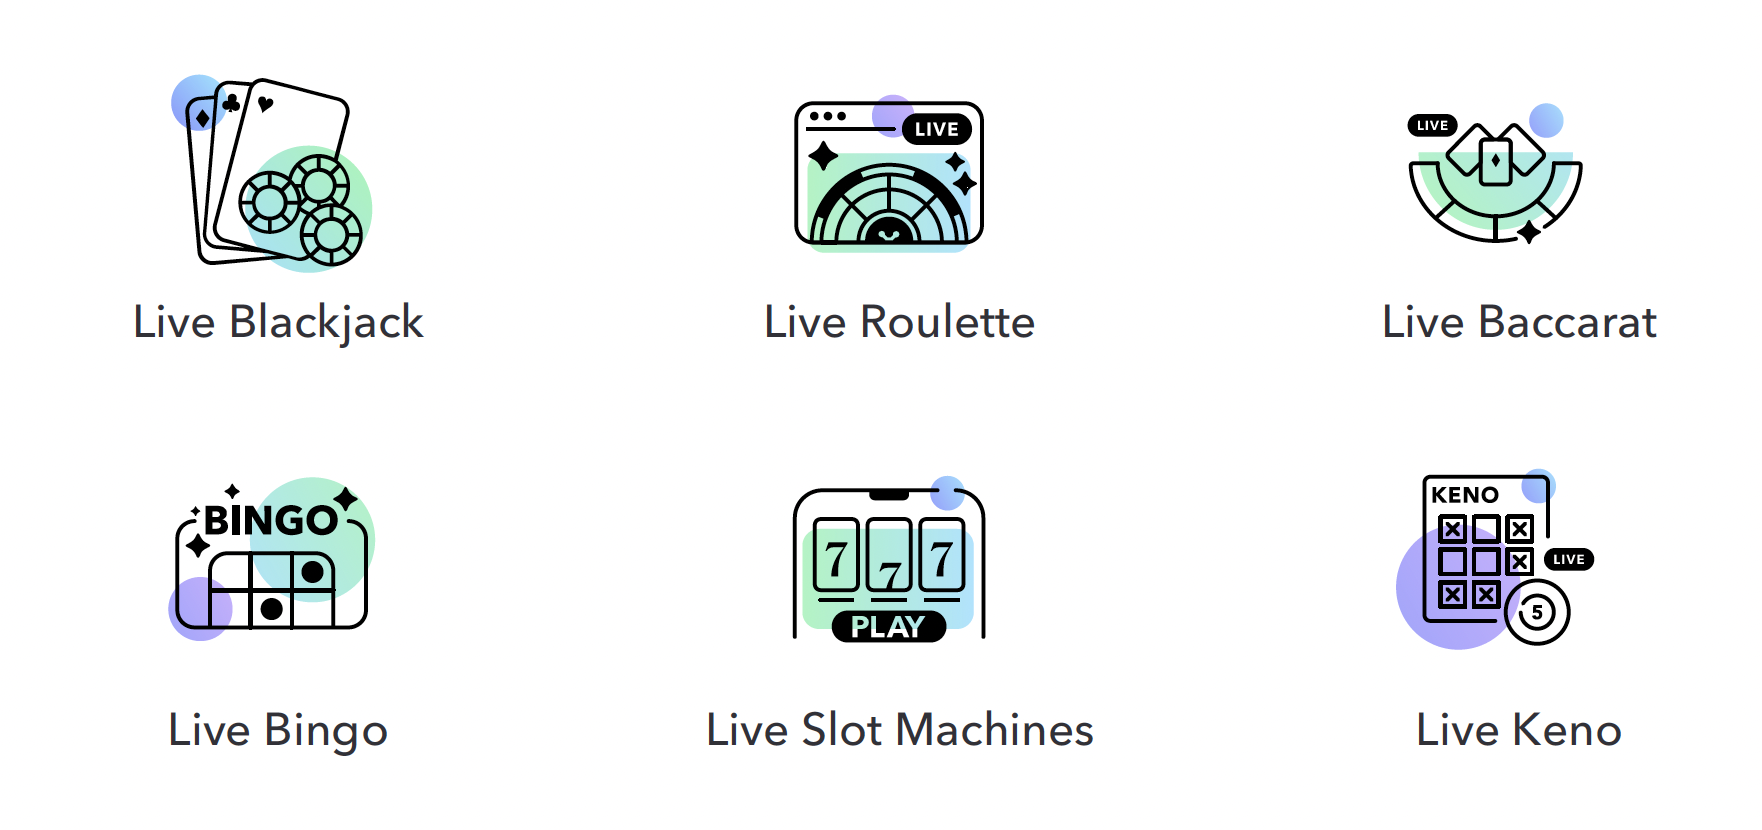 Illustrated visual of cards and chips for live blackjack, a live stream of live roulette, live baccarat, live bingo live slot machines, and live keno